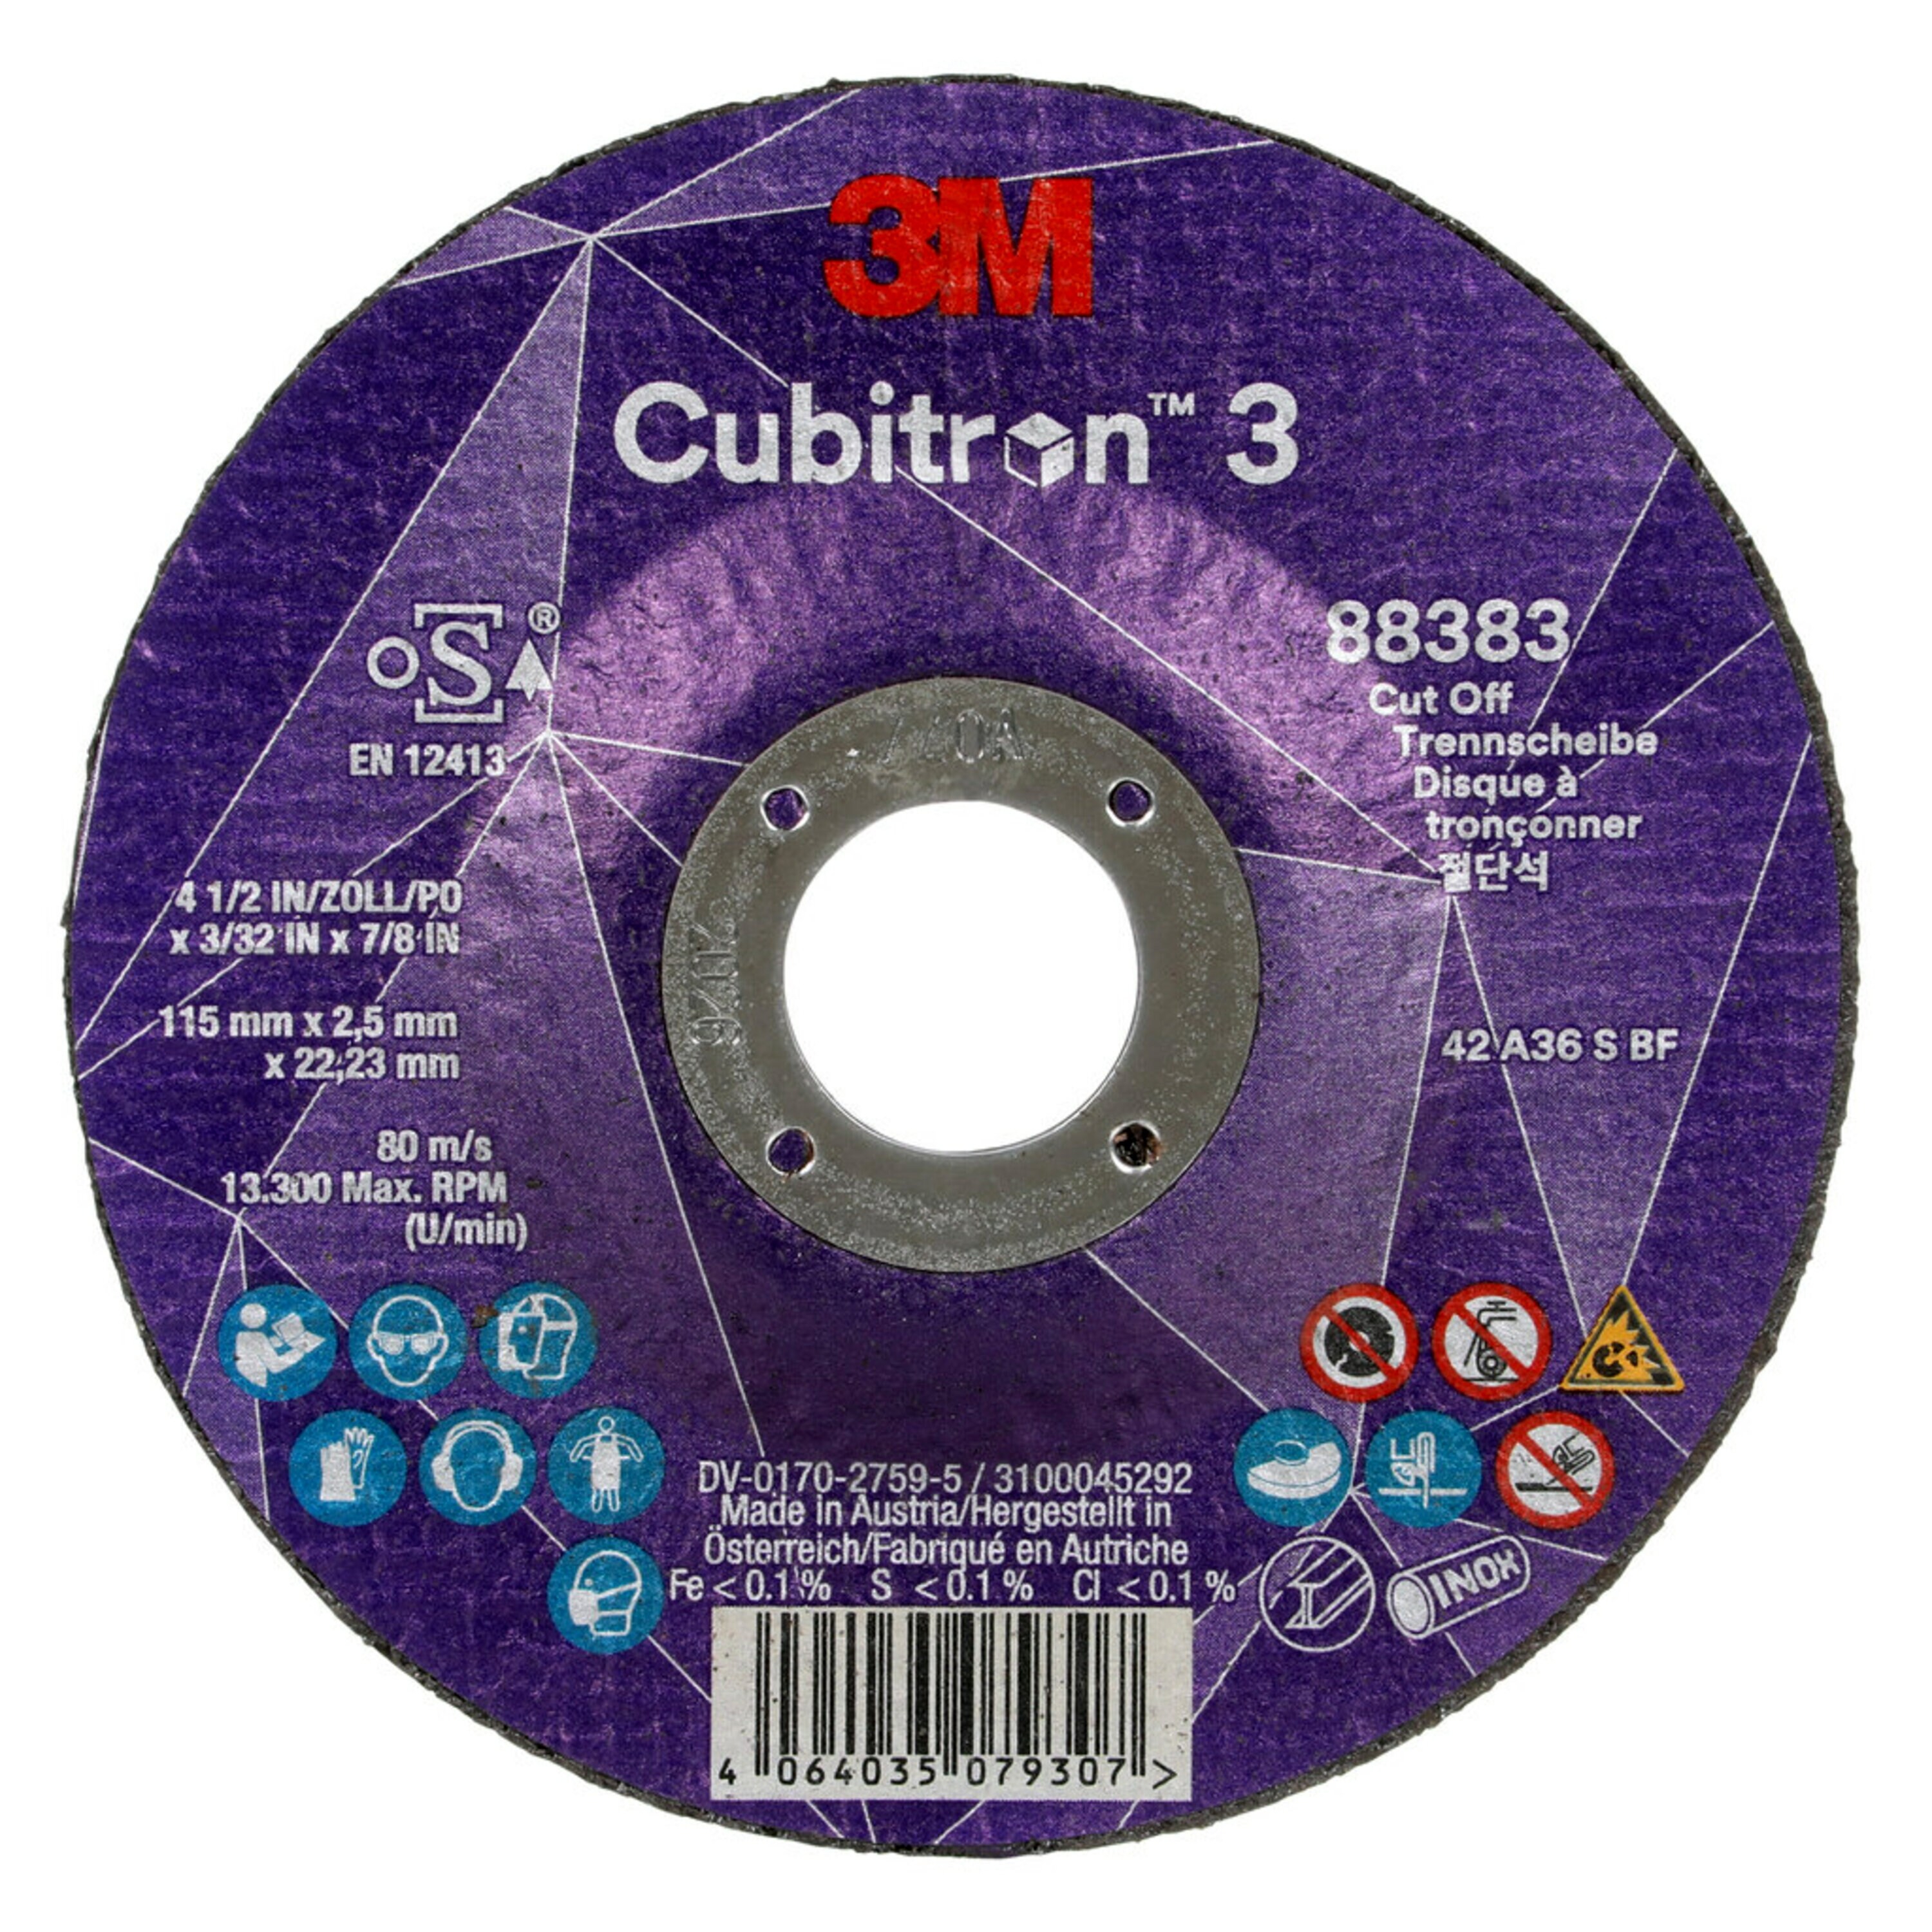 3M Cubitron 3, 115 mm, 2,5 mm, 22,23 mm, 36+, tipo 42 #89573